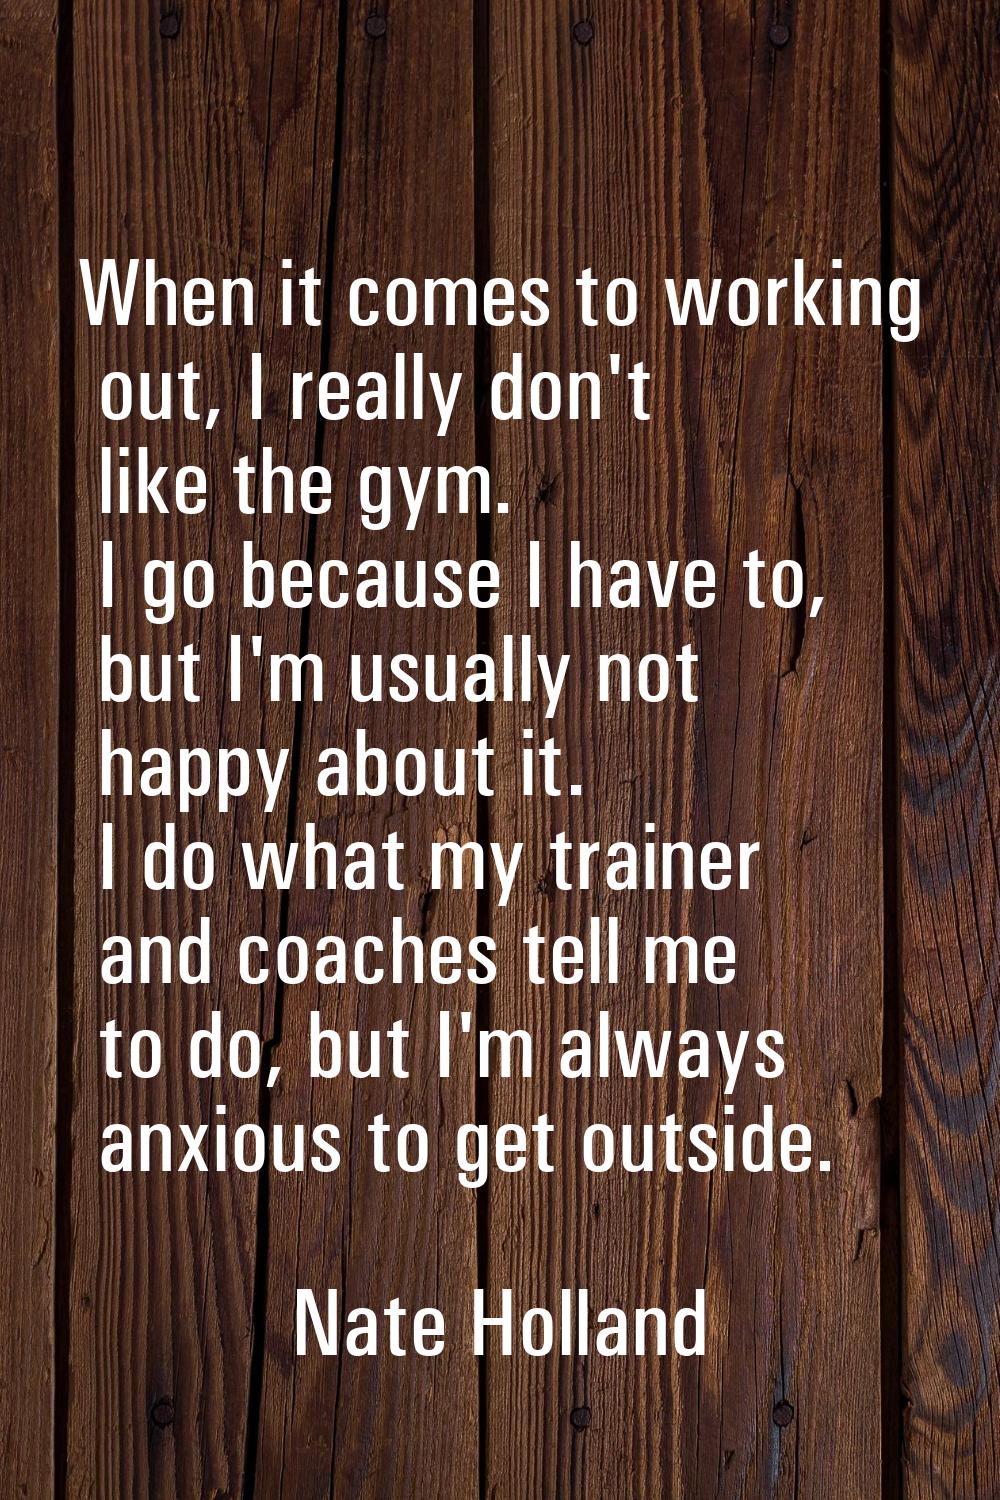 When it comes to working out, I really don't like the gym. I go because I have to, but I'm usually 